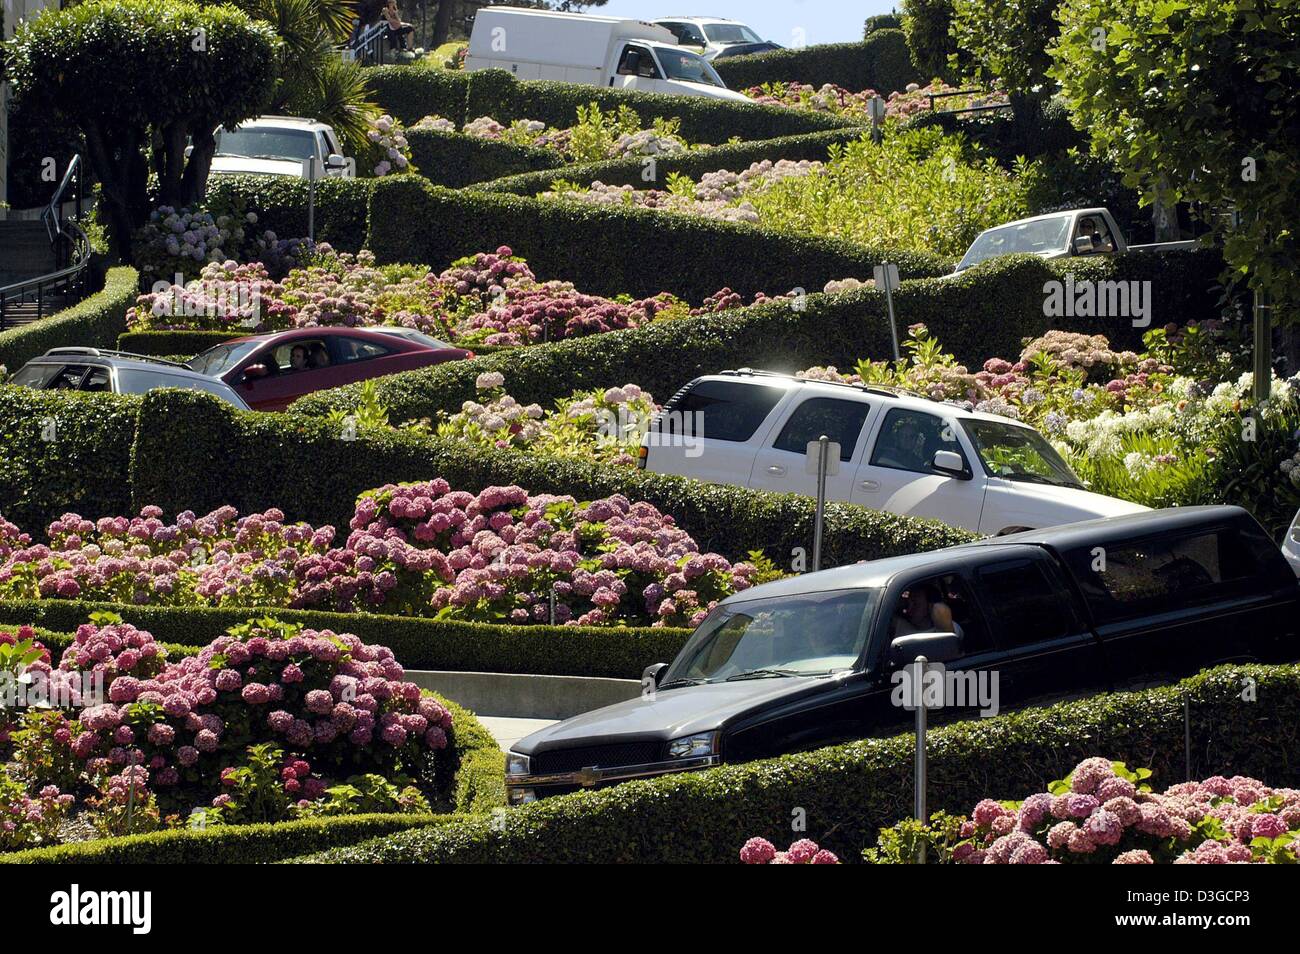 (dpa) - Cars head down scenic Lombard Street in the northern Californian city of San Francisco, USA, 20 July 2004. Lombard Street is San Francisco's crookedest street.ÊThe steep, hilly street was created with sharp curves to switchback down the one-way hill past beautiful Victorian mansions.ÊIt is paved with bricks and is an amazing site and beloved tourist attraction. Stock Photo